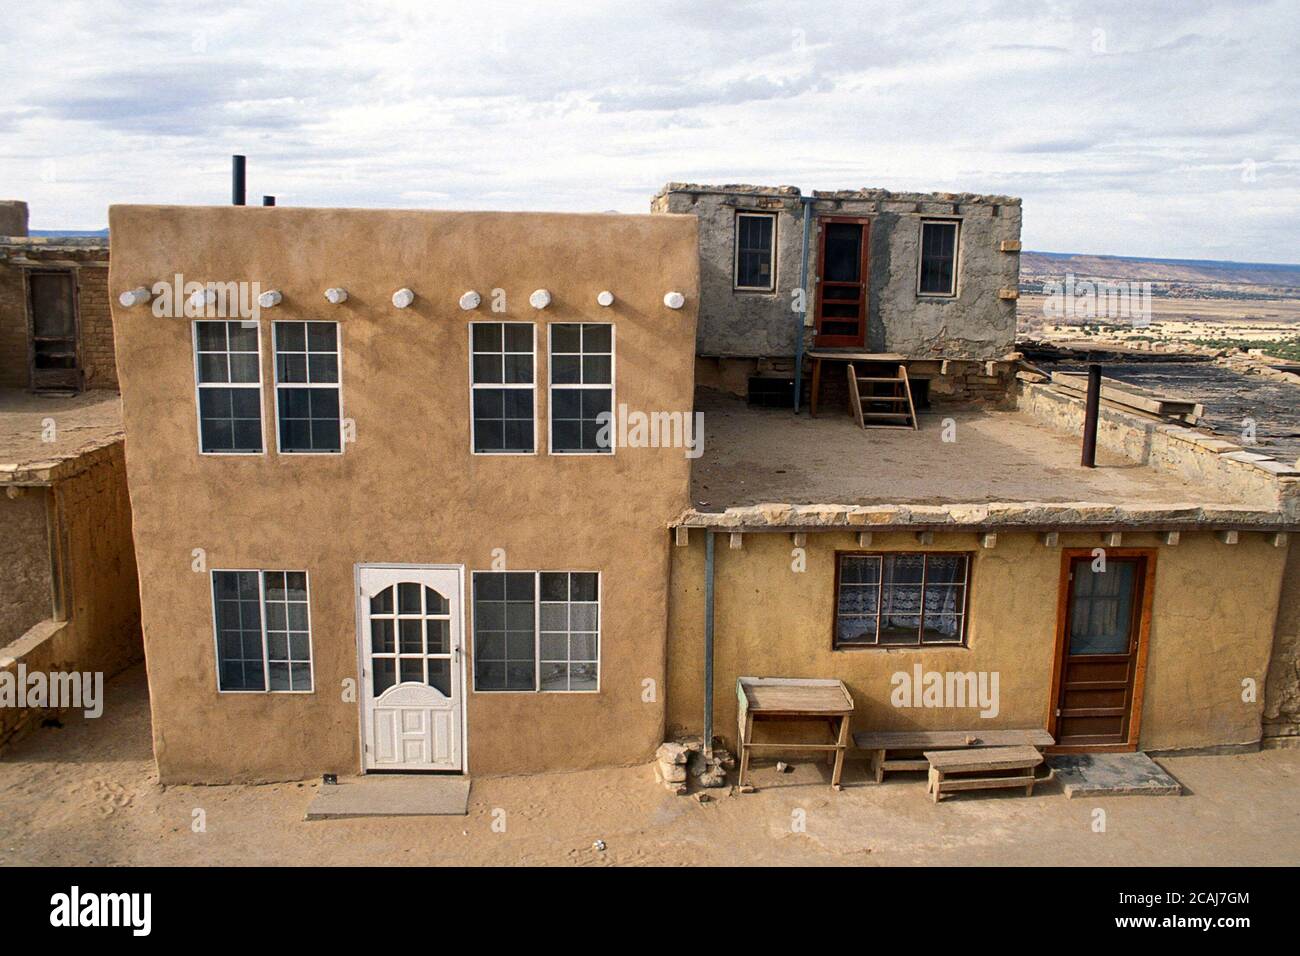 Acoma Pueblo, New Mexico USA, 1993: Acoma 'Sky City,' 500-year-old community is the oldest continuously inhabited settlement in North America. Built atop a mesa, the isolated village has no utilities available. ©Bob Daemmrich Stock Photo